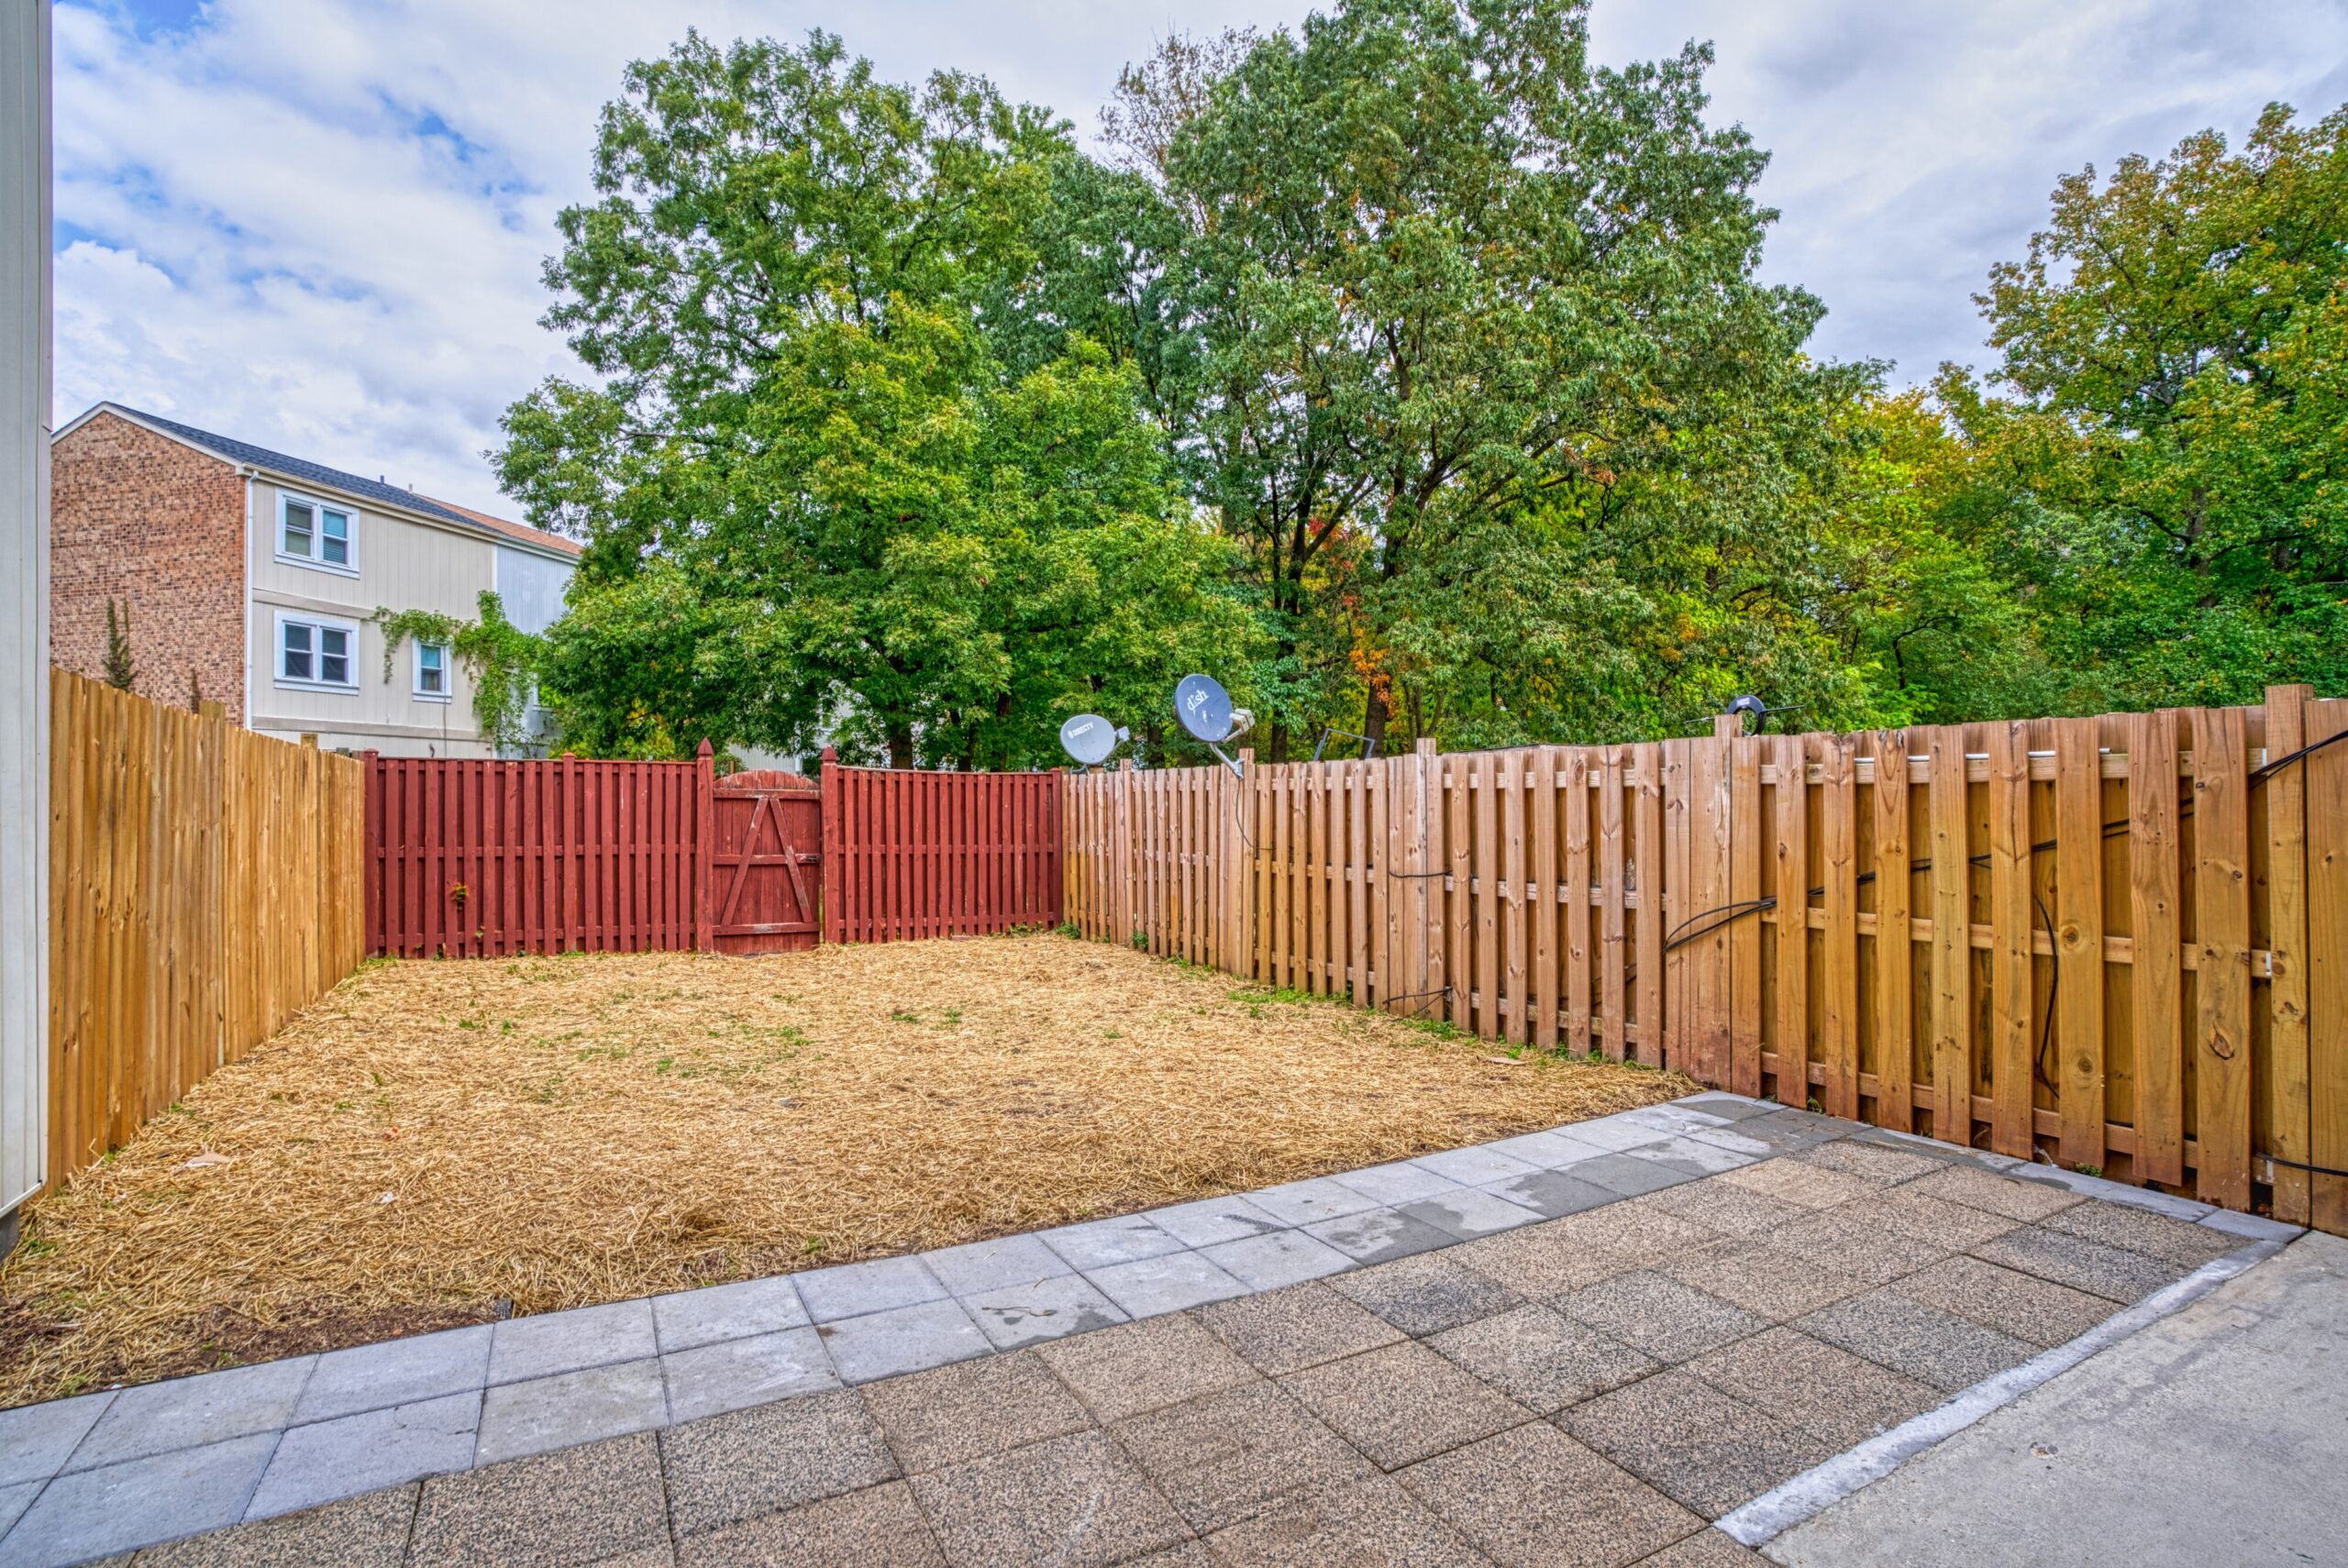 Professional exterior photo of 6302 Arwen Court, Fort Washington, MD - showing the view from the rear door across the patio to the grassy area and rear red fence